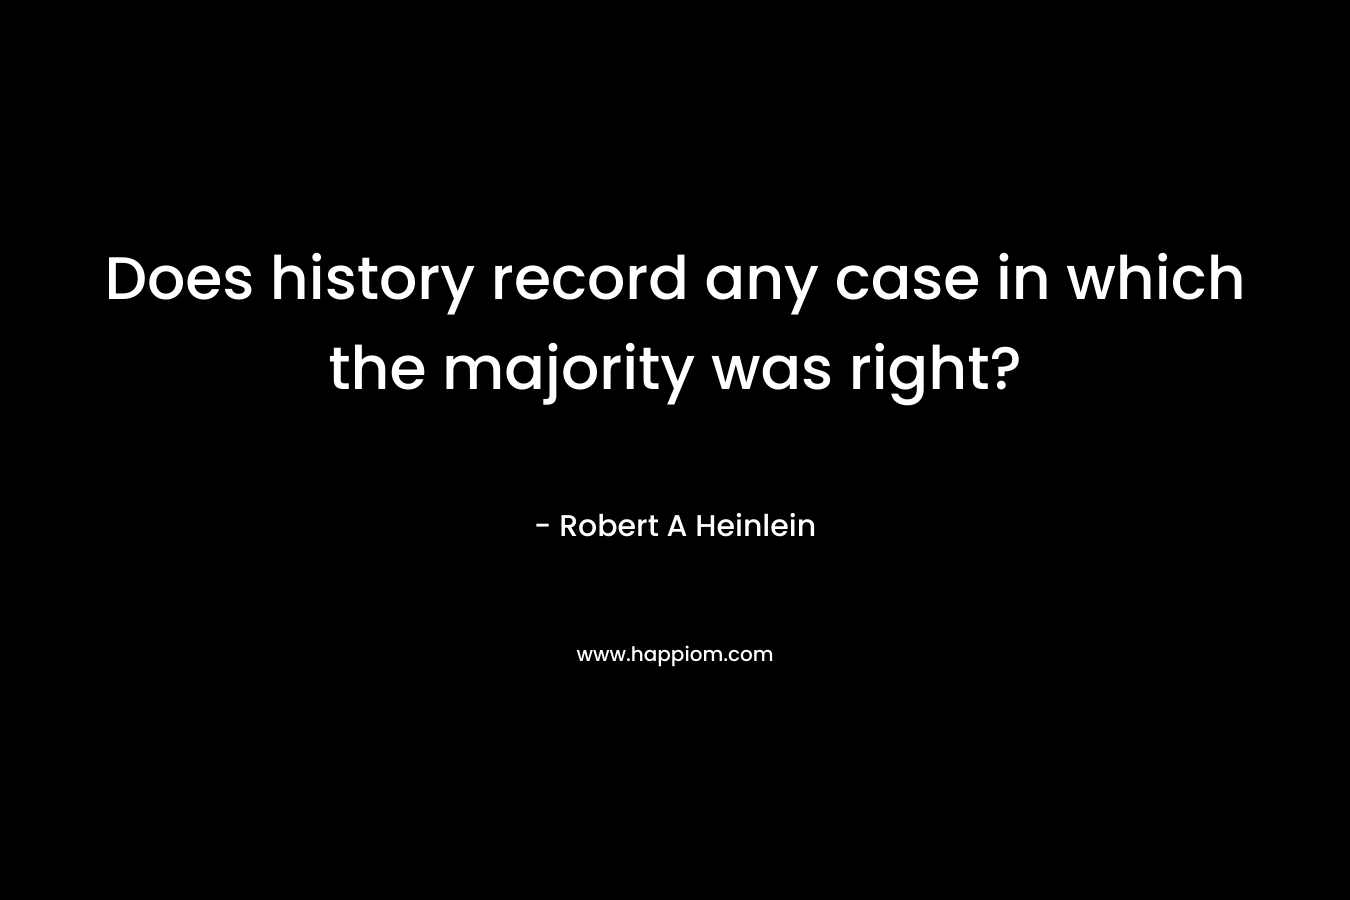 Does history record any case in which the majority was right? – Robert A Heinlein